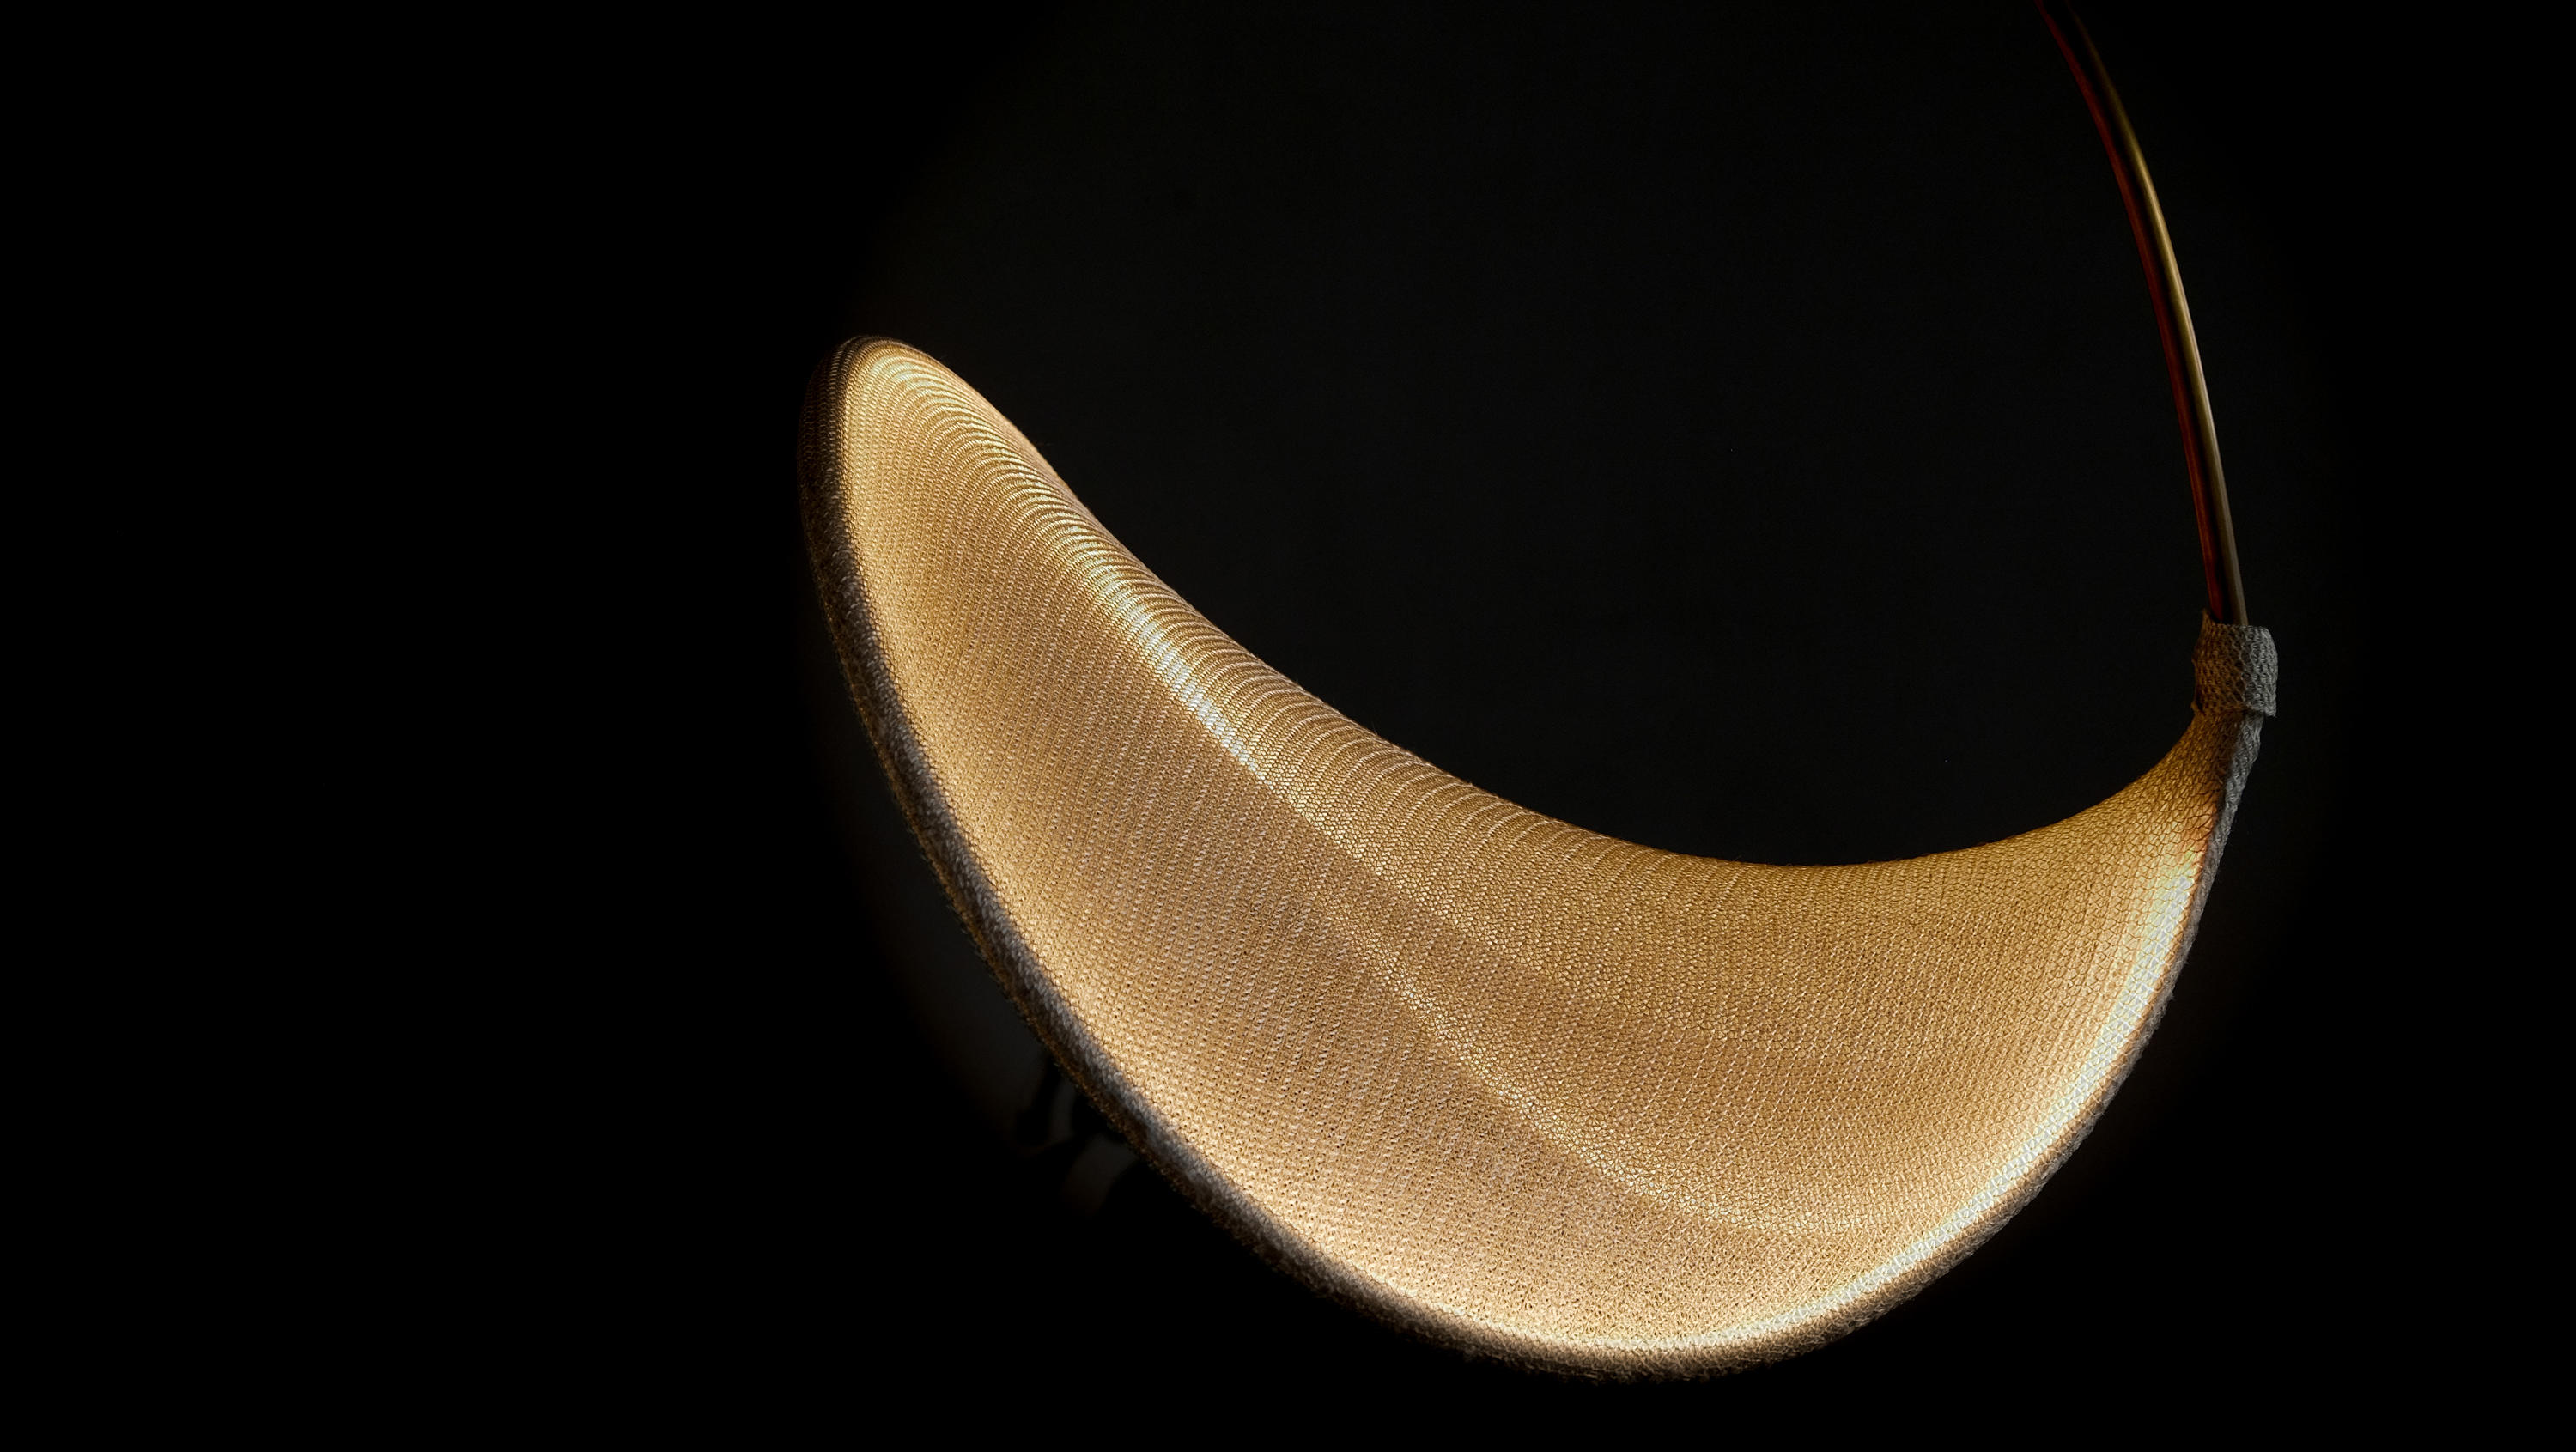 llll.05  Golden coloured sculptural led light stretched fabric - llll